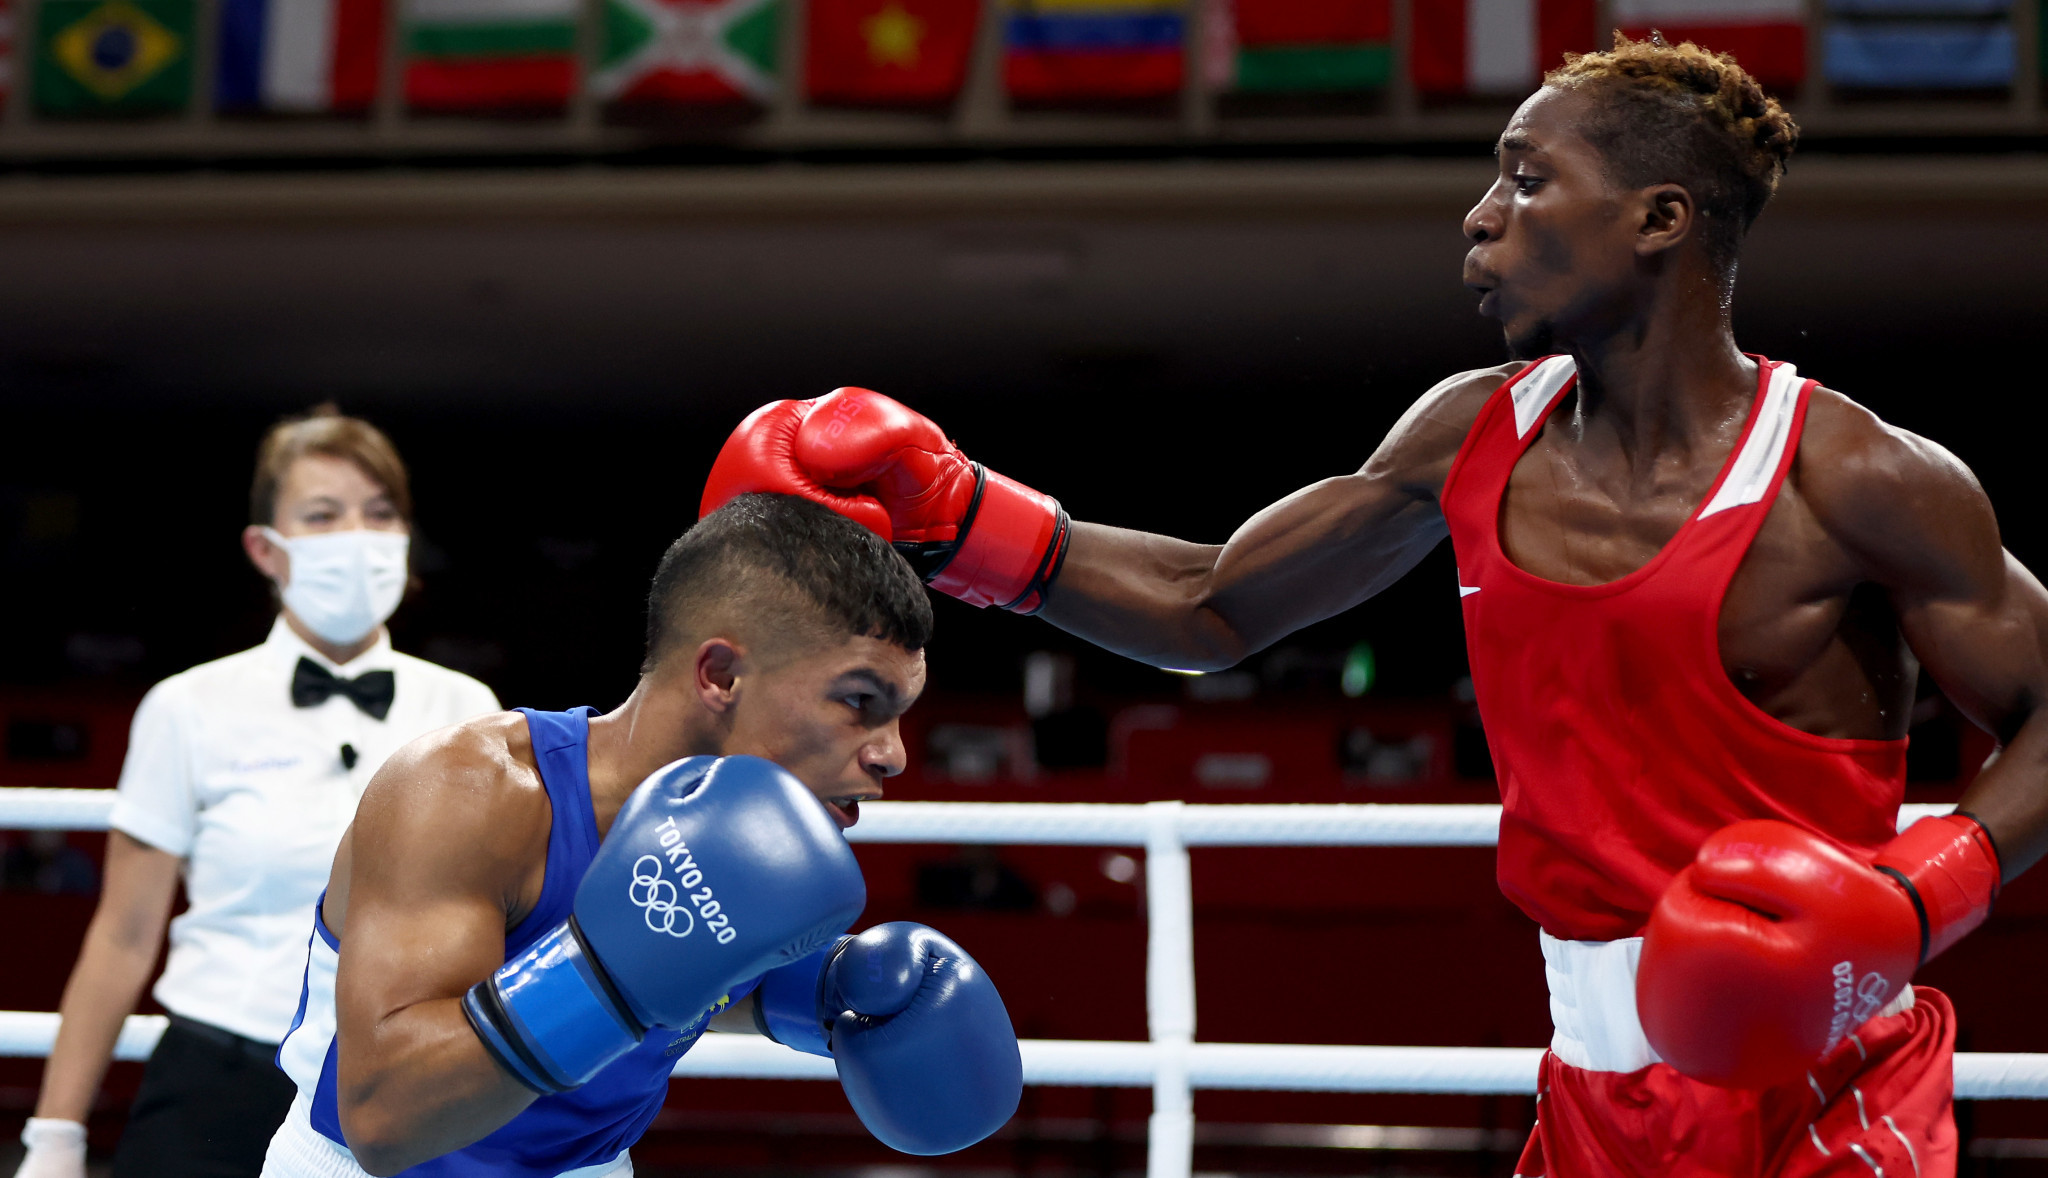 Alex Winwood, left, competed at the Tokyo 2020 Olympics but lost in the round of 32 to Zambia's Patrick Chinyemba ©Getty Images